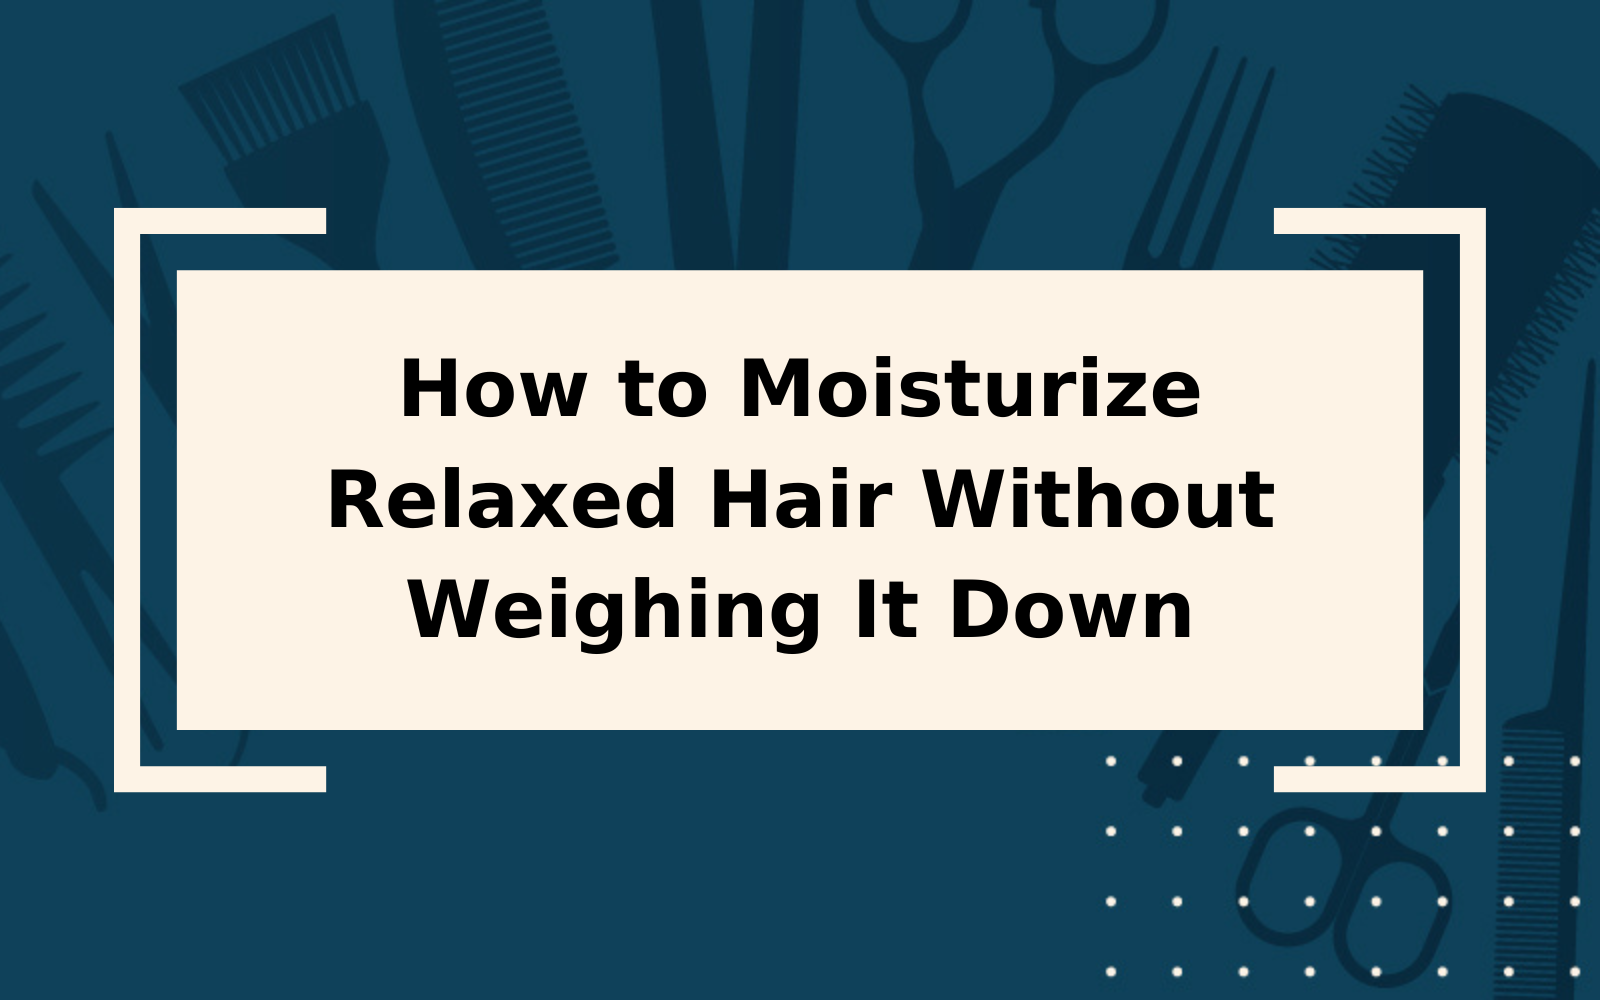 How to Moisturize Relaxed Hair Without Weighing It Down